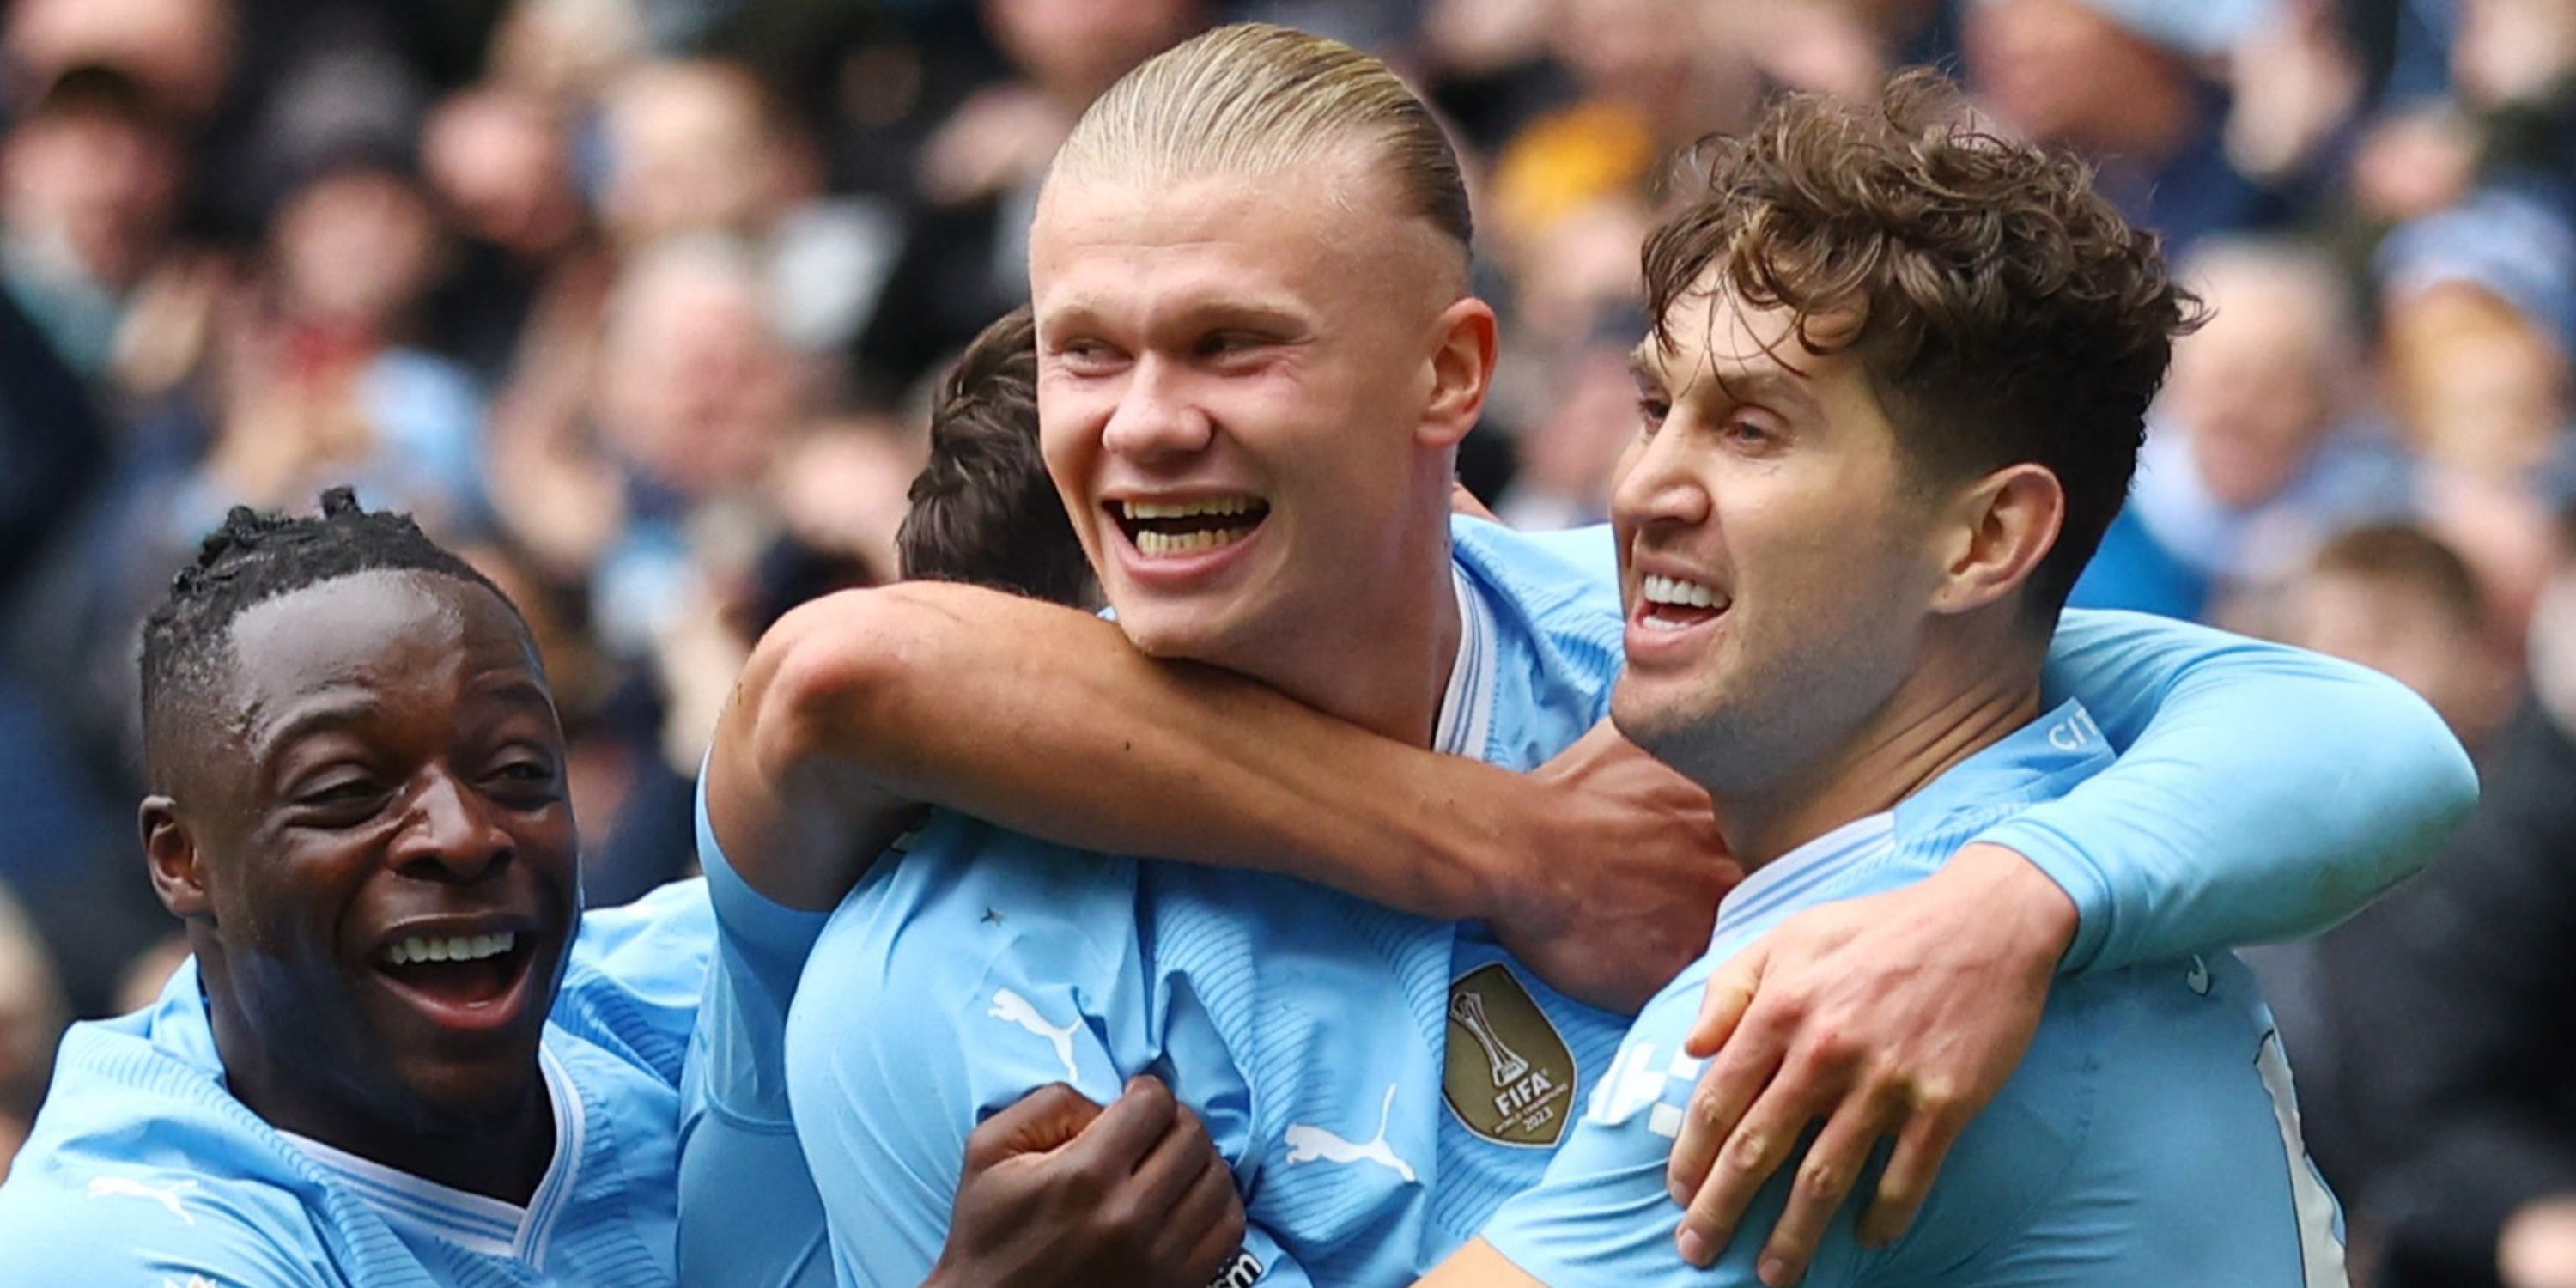 Manchester City's Erling Braut Haaland celebrates scoring their goal vs Everton with Jeremy Doku and John Stones